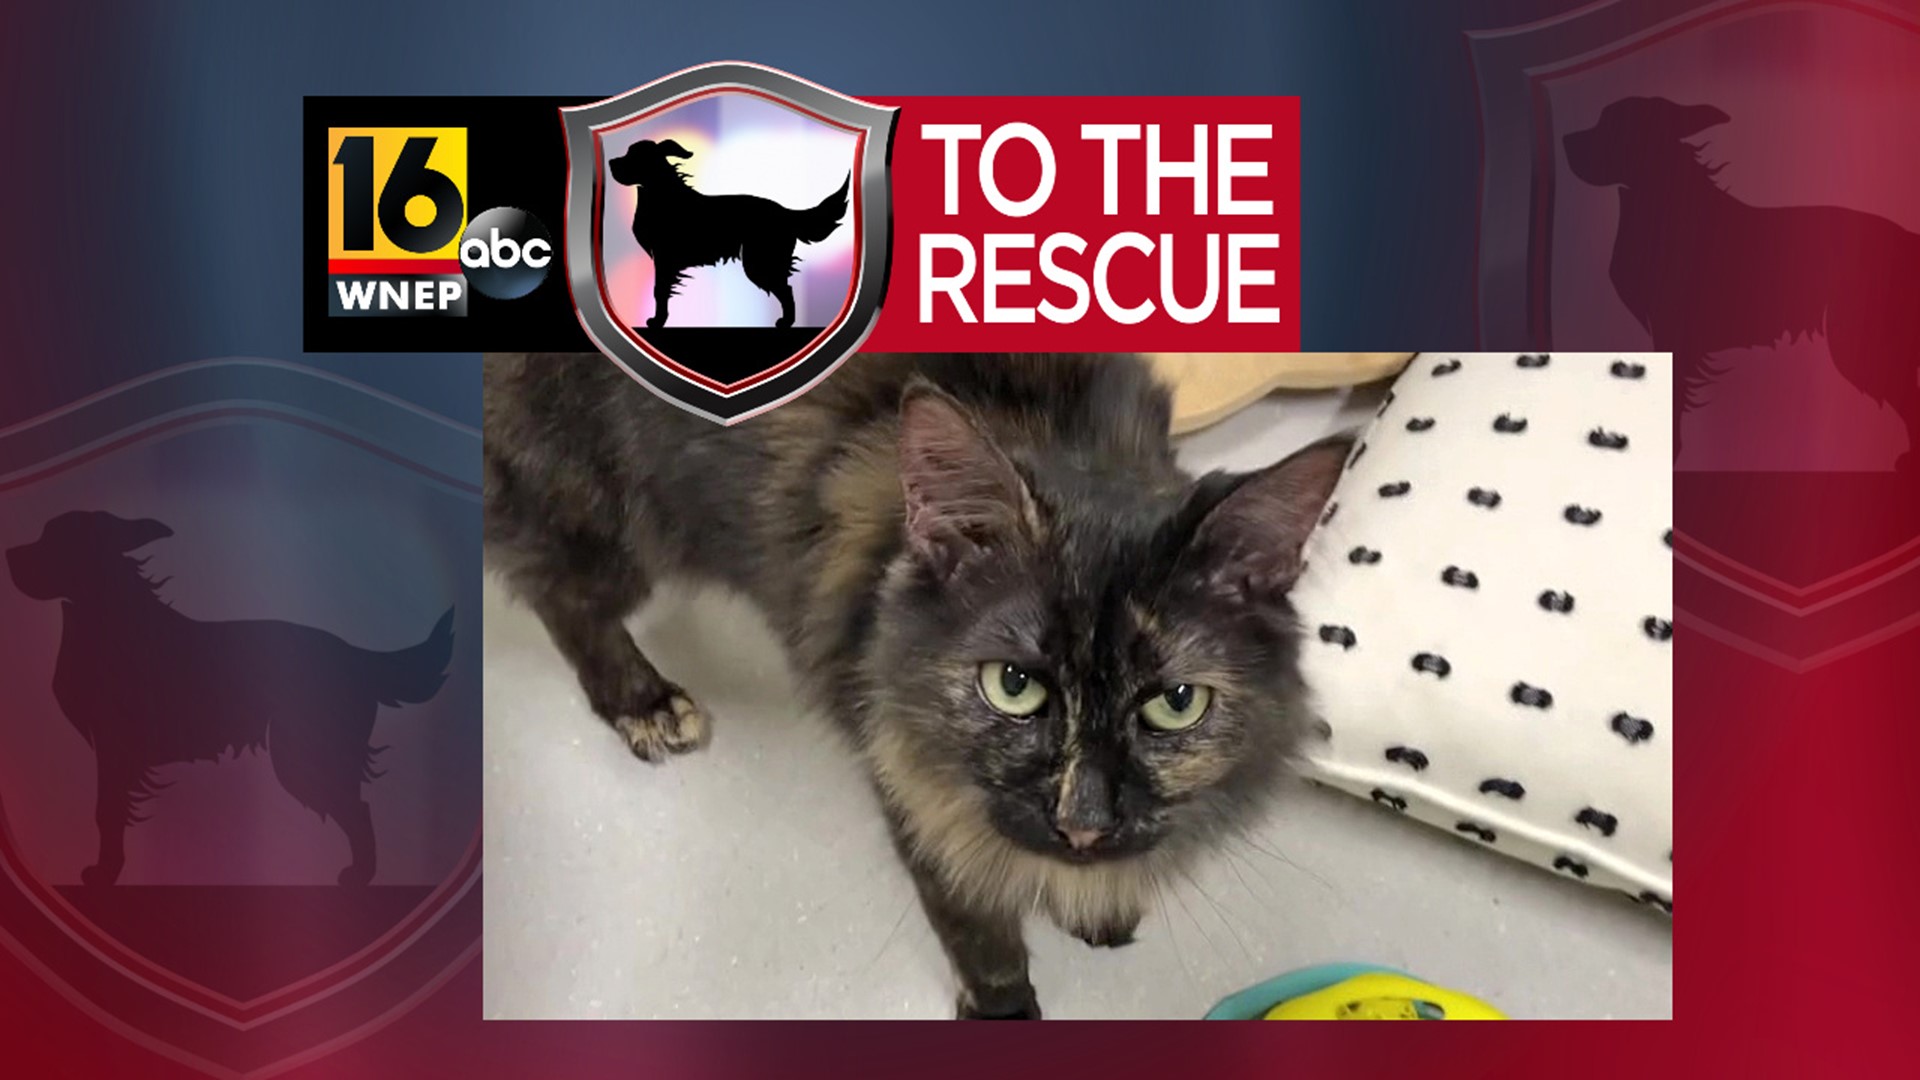 In this week's 16 To The Rescue, we meet one of the older and longest residents at Griffin Pond Animal Shelter, the sassy but sweet Tinkerbelle.